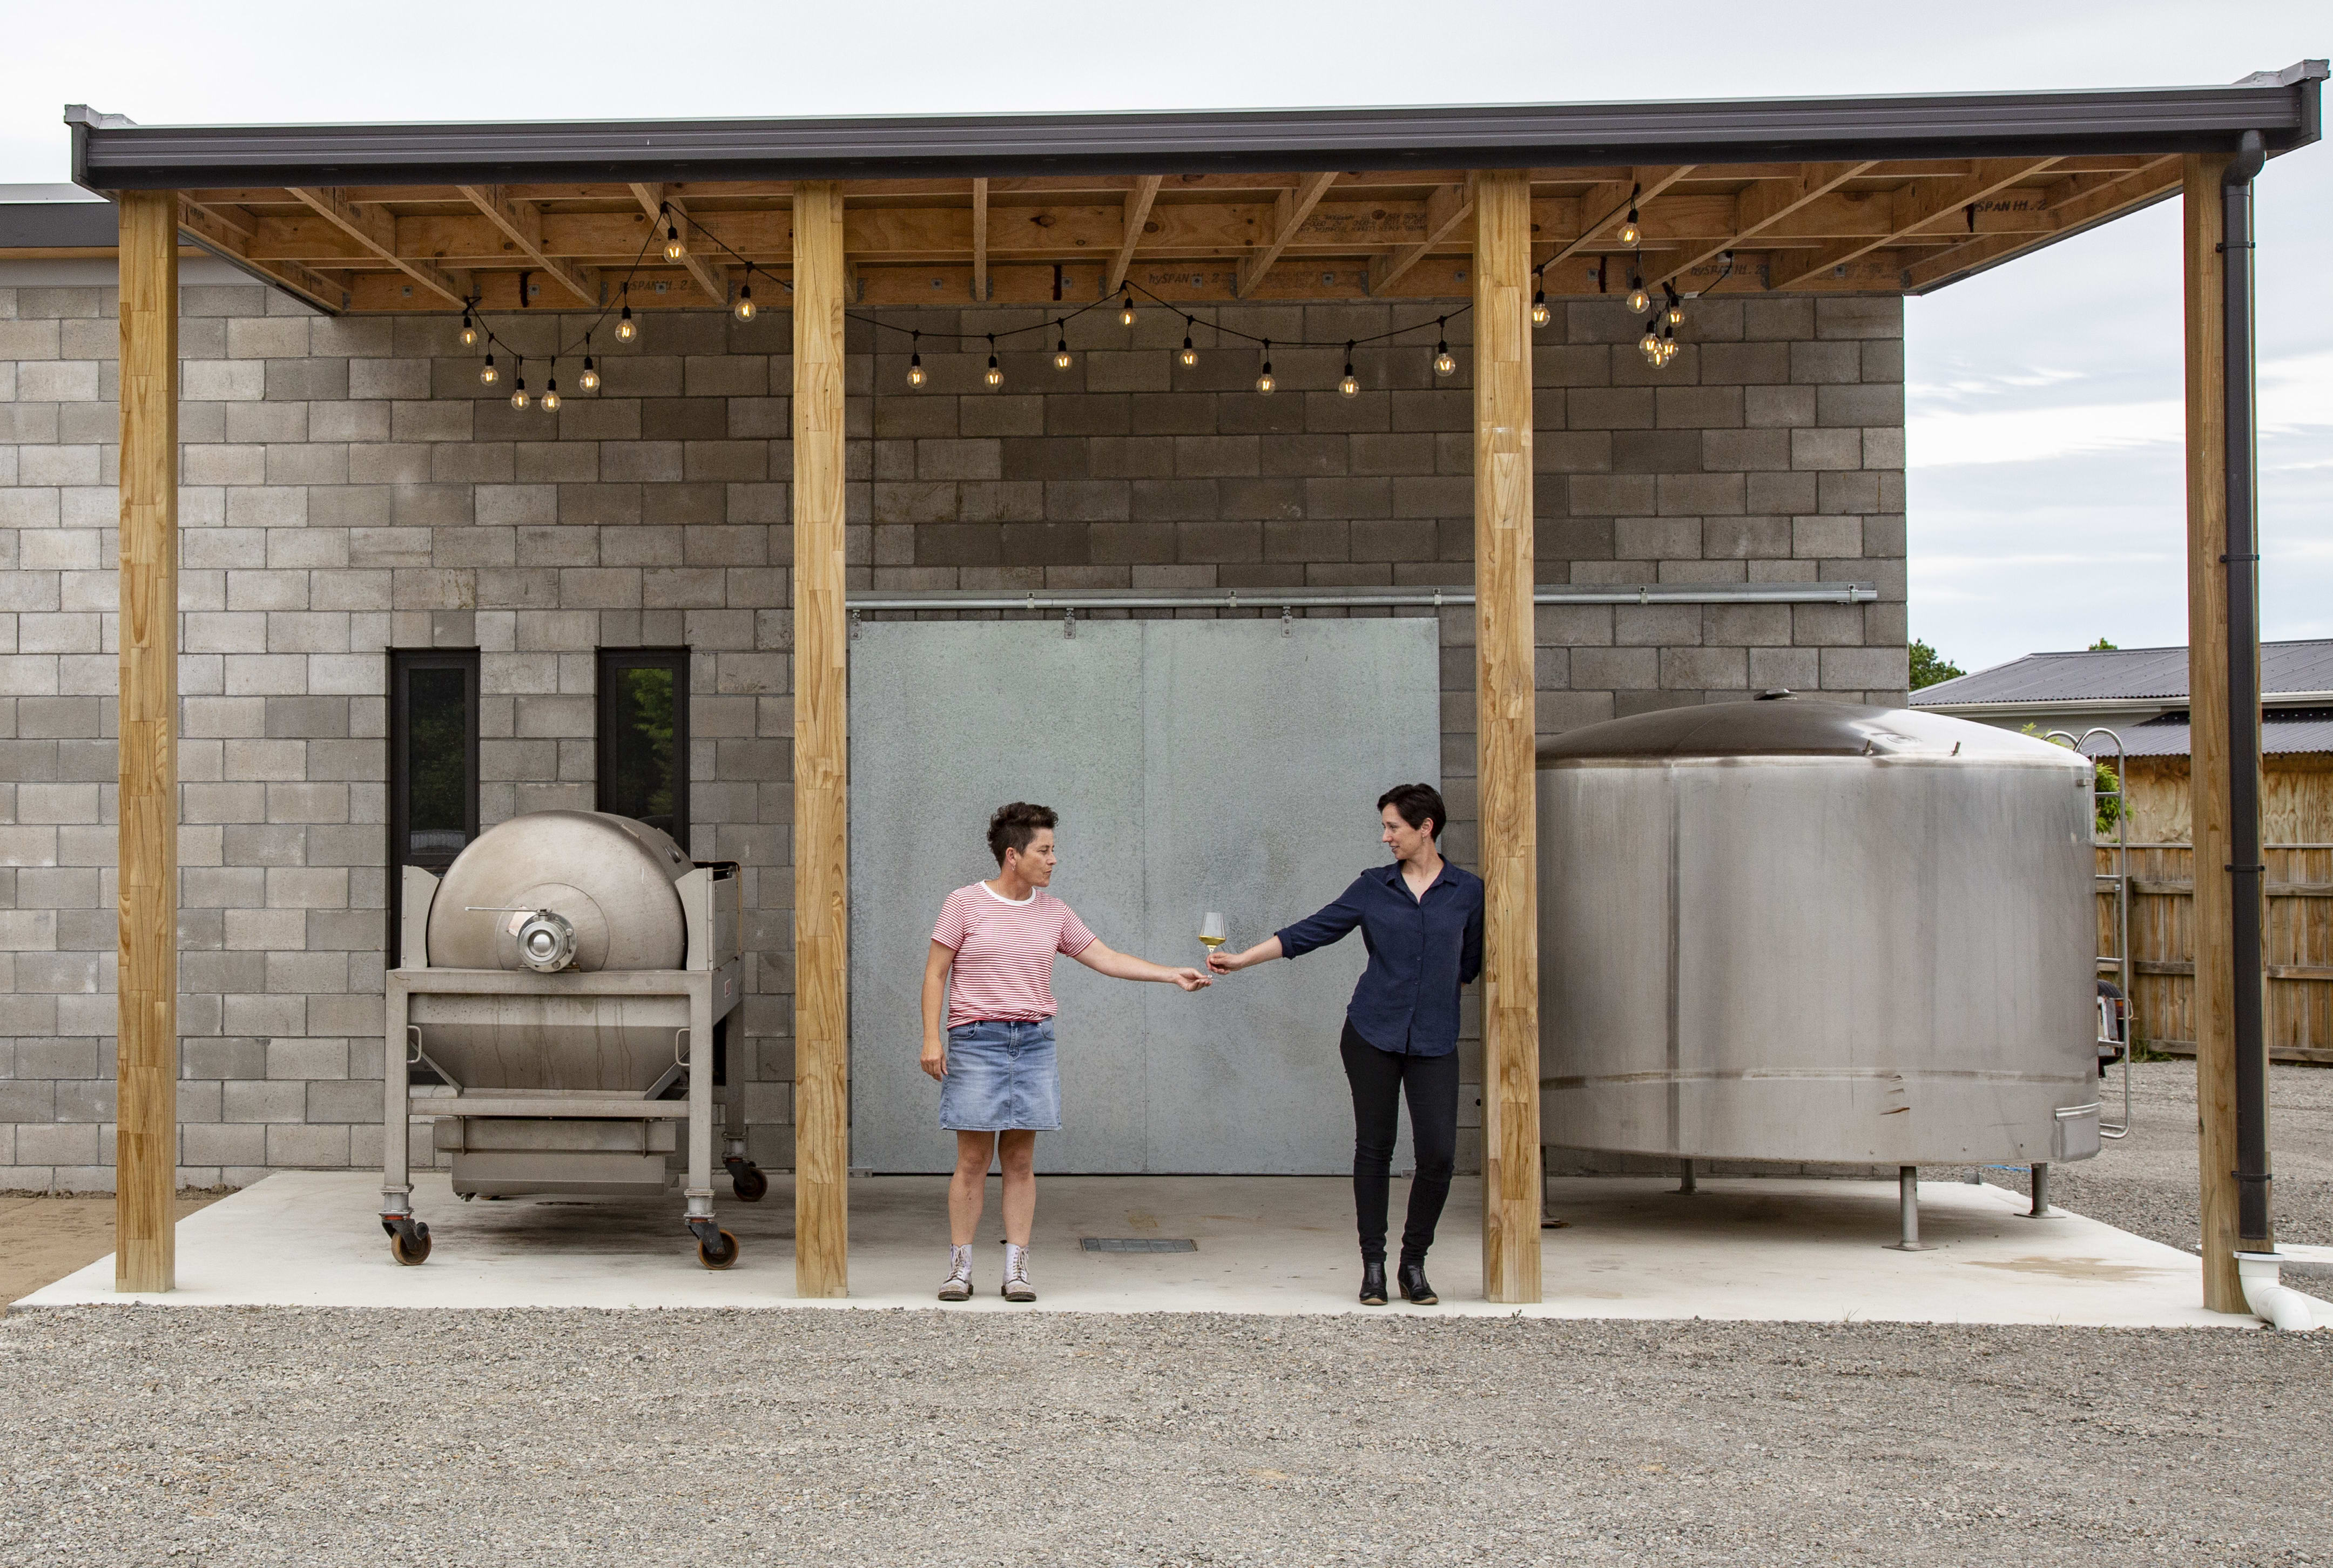 Alexia Winemaker Jane Cooper and her wife Lesley Reidy at their purpose-built urban winery in Greytown.